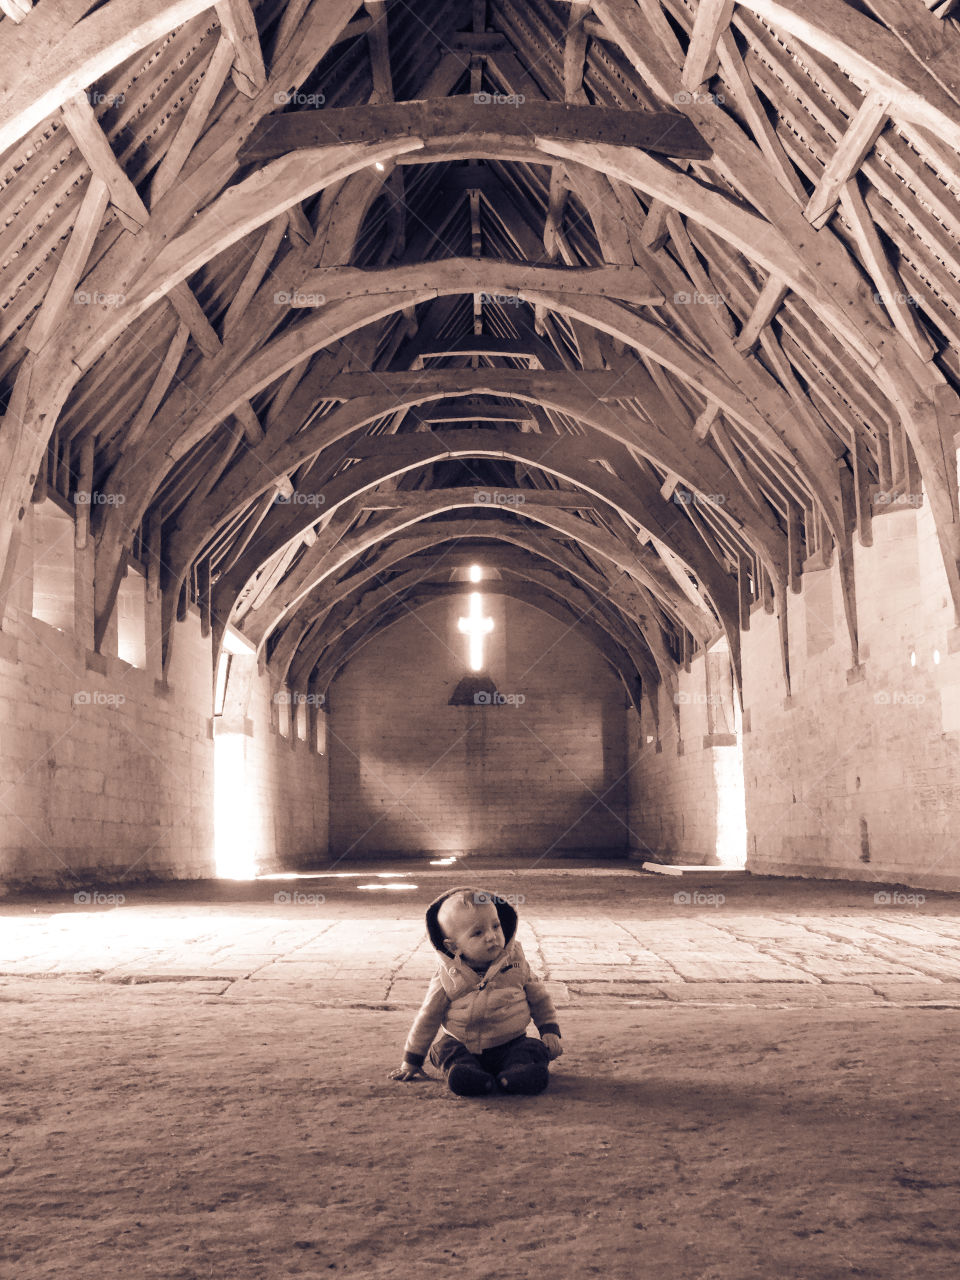 Historic barn meets baby boy. On a family day out I spotted an opportunity to capture a photo of my son in a historic barn with no one around but him